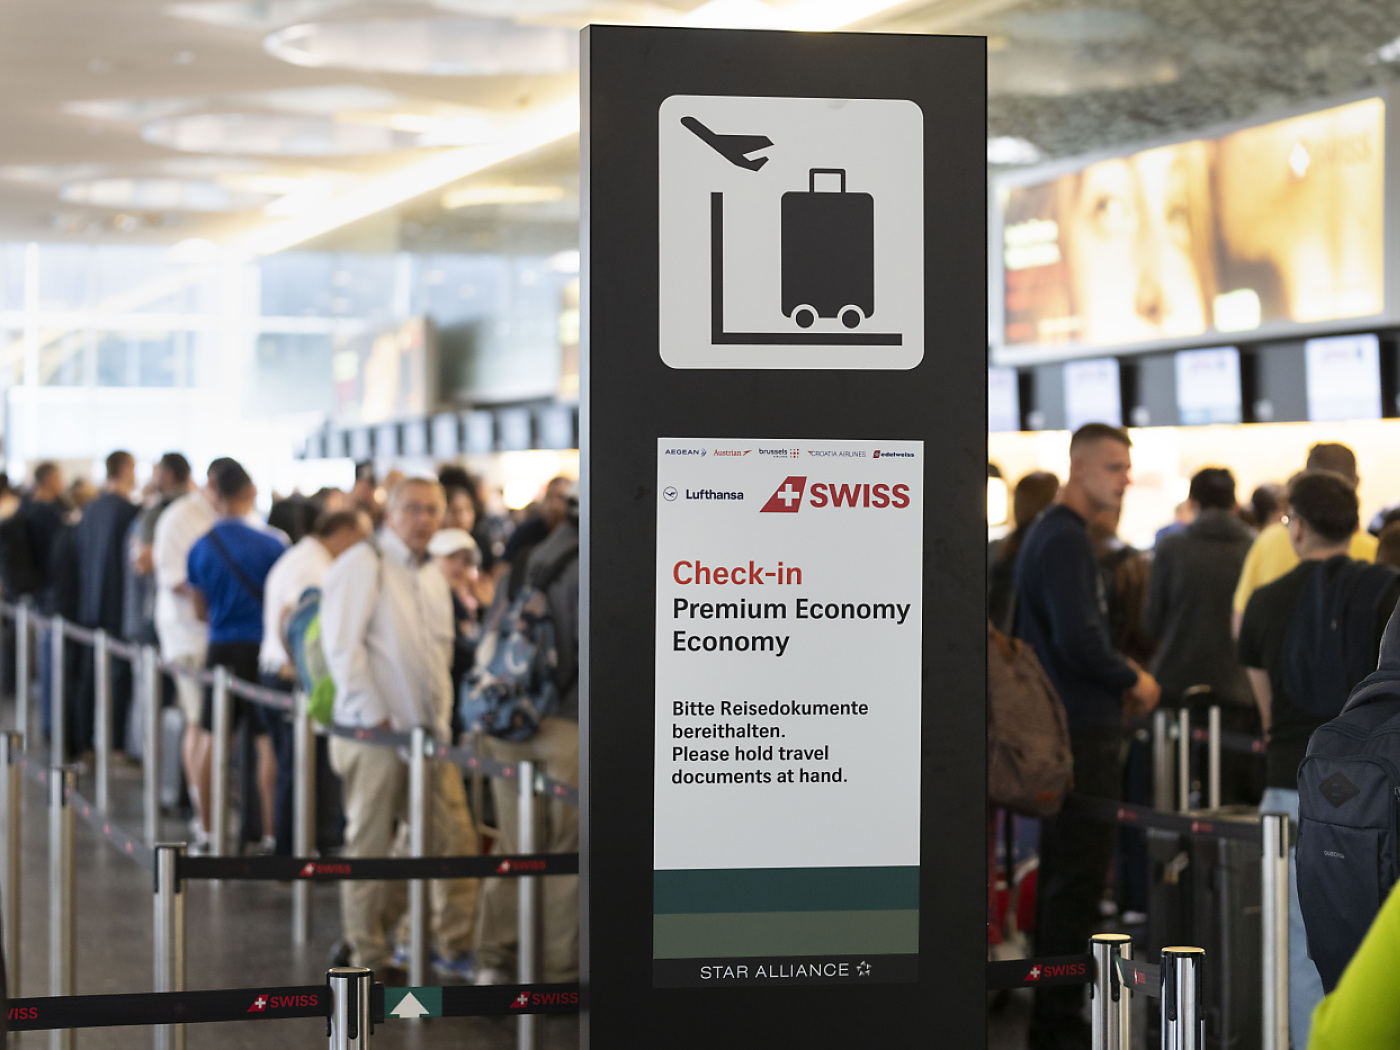 Over 200,000 passengers use Zurich Airport at the start of the vacation season